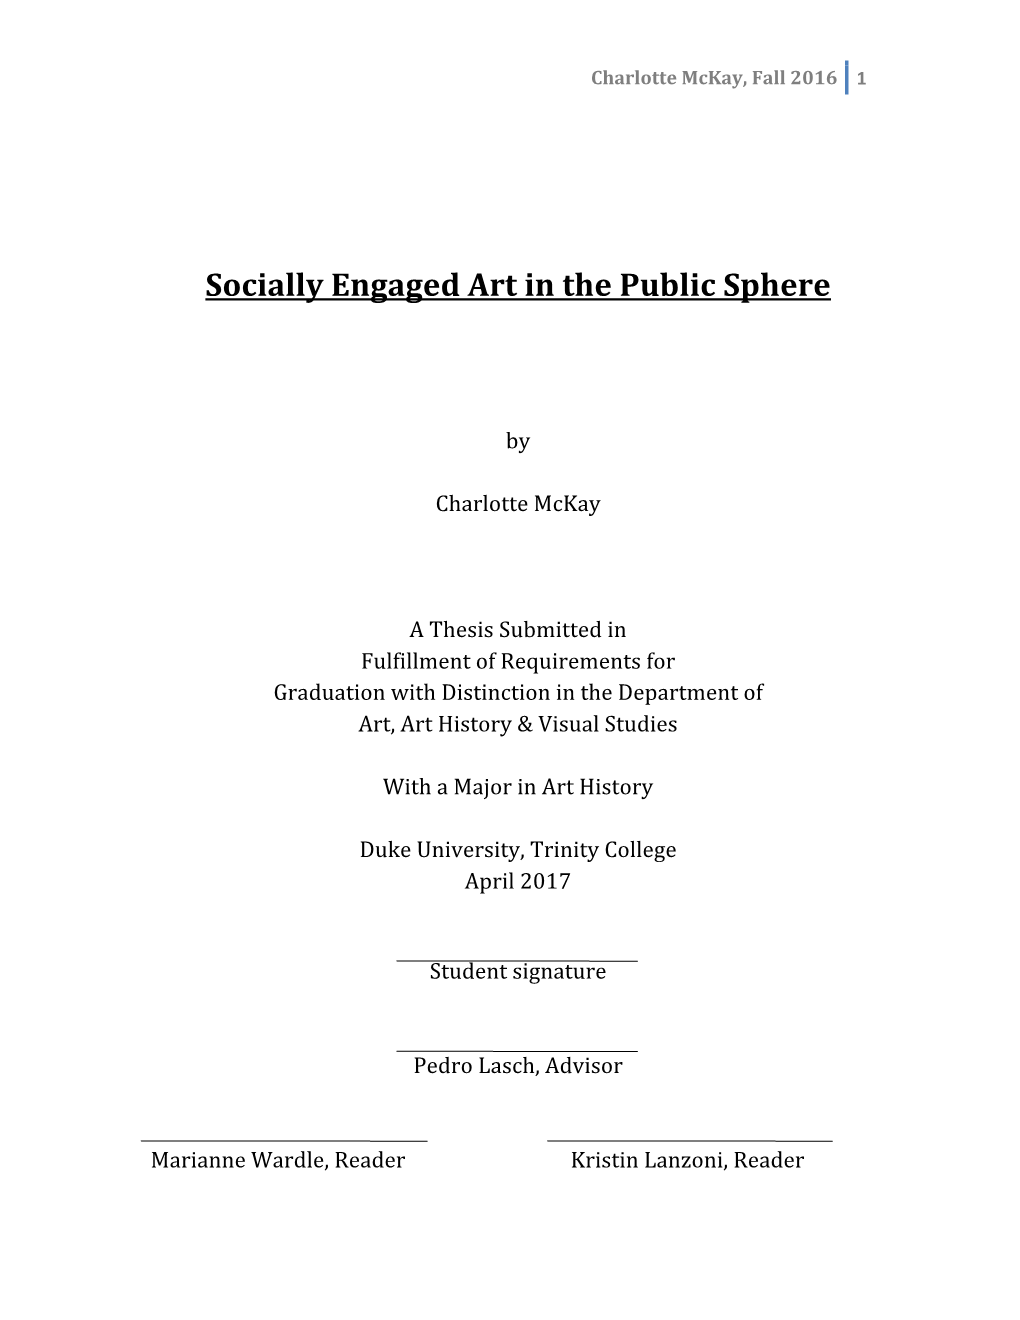 Socially Engaged Art in the Public Sphere